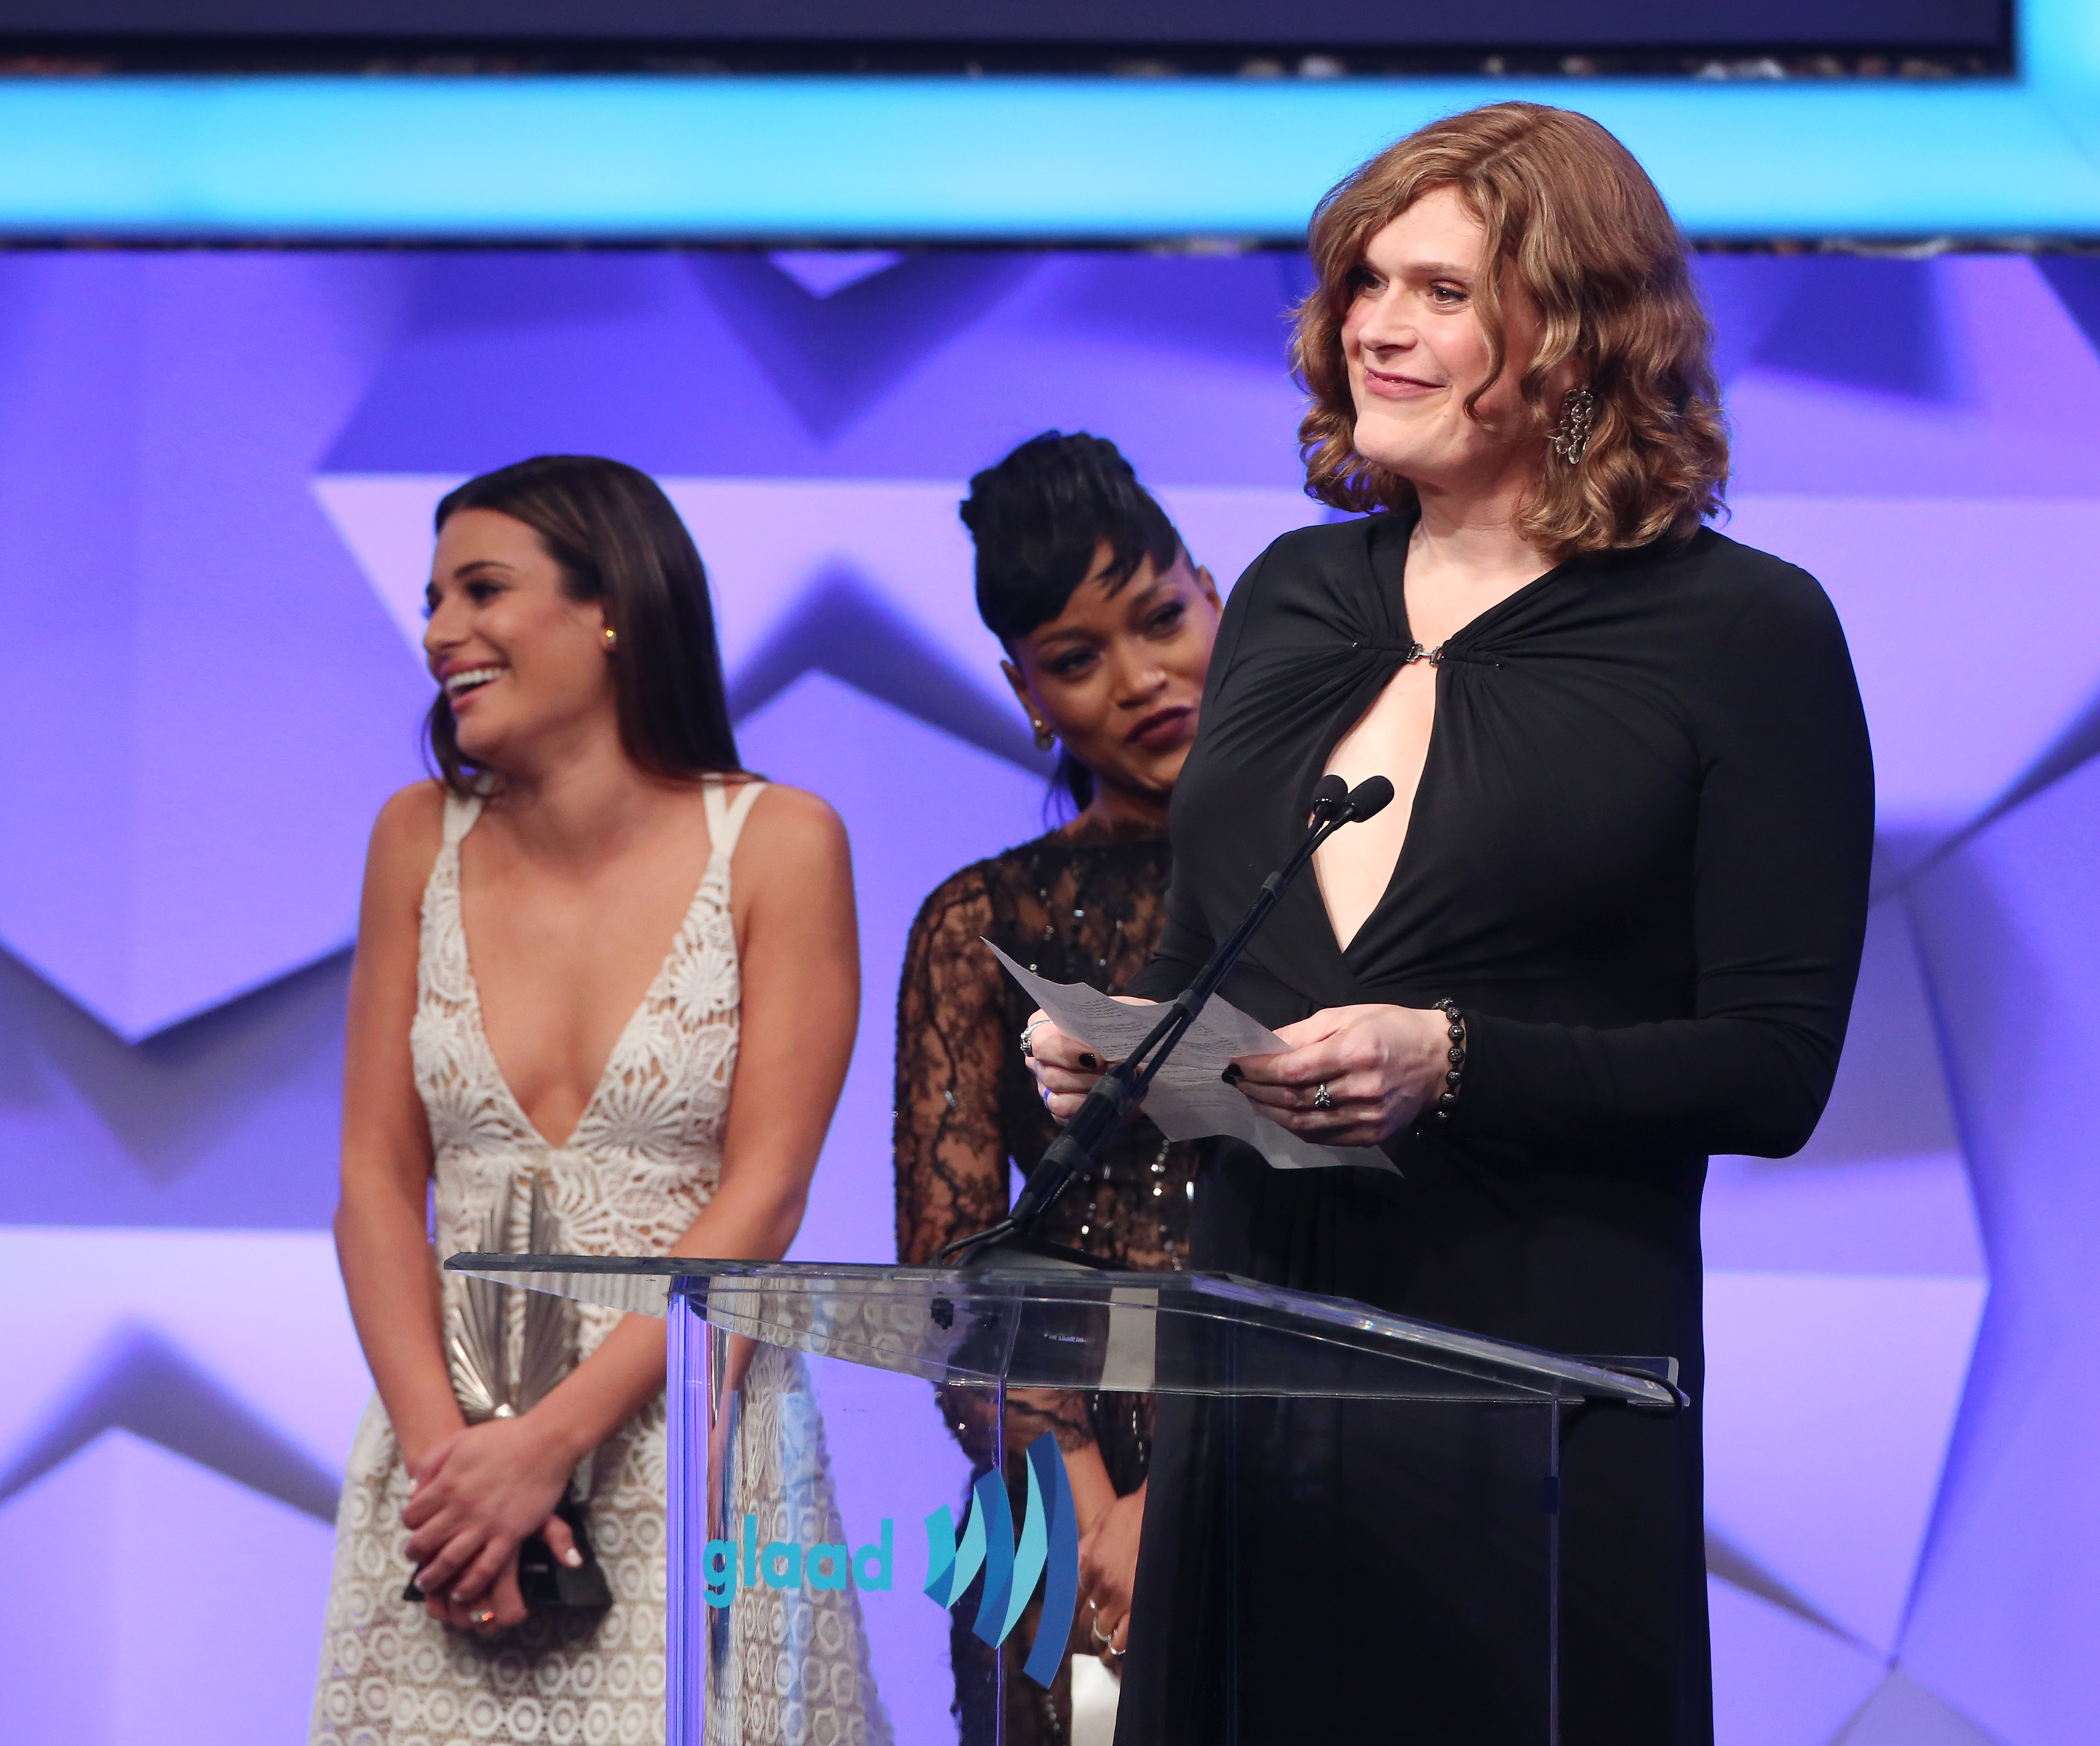 Lea Michele, Keke Palmer and Lilly Wachowski during the 27th Annual GLAAD Media Awards at the Beverly Hilton Hotel on April 2, 2016 in Beverly Hills, California. | Source: Getty Images